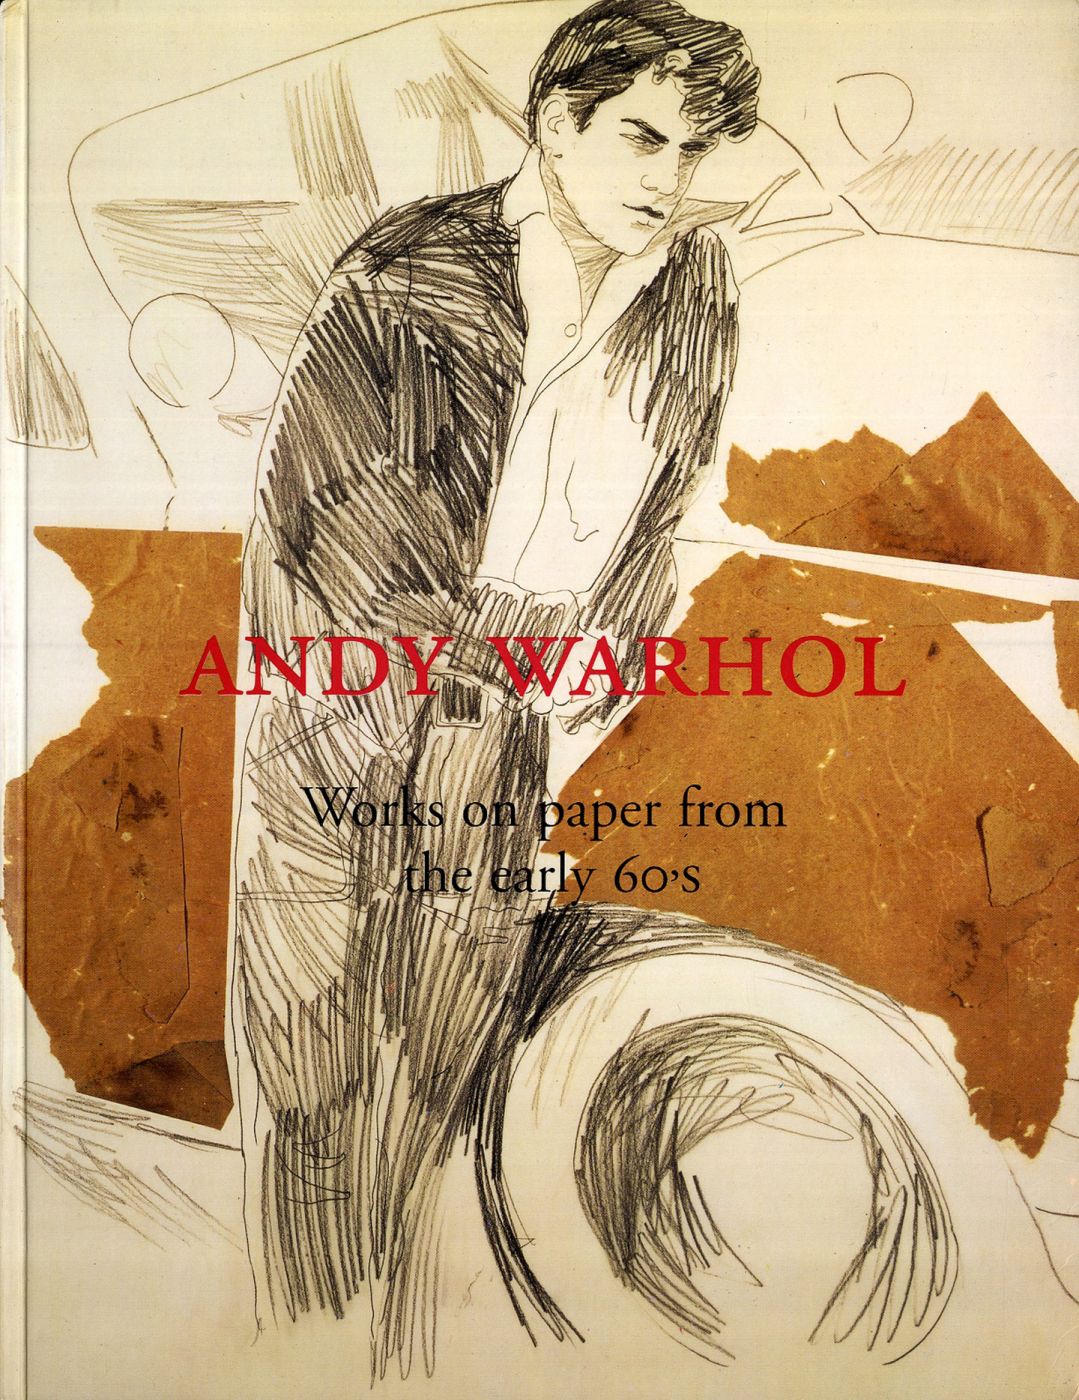 Andy Warhol: Works on paper from the early 60's [SIGNED ASSOCIATION COPY]